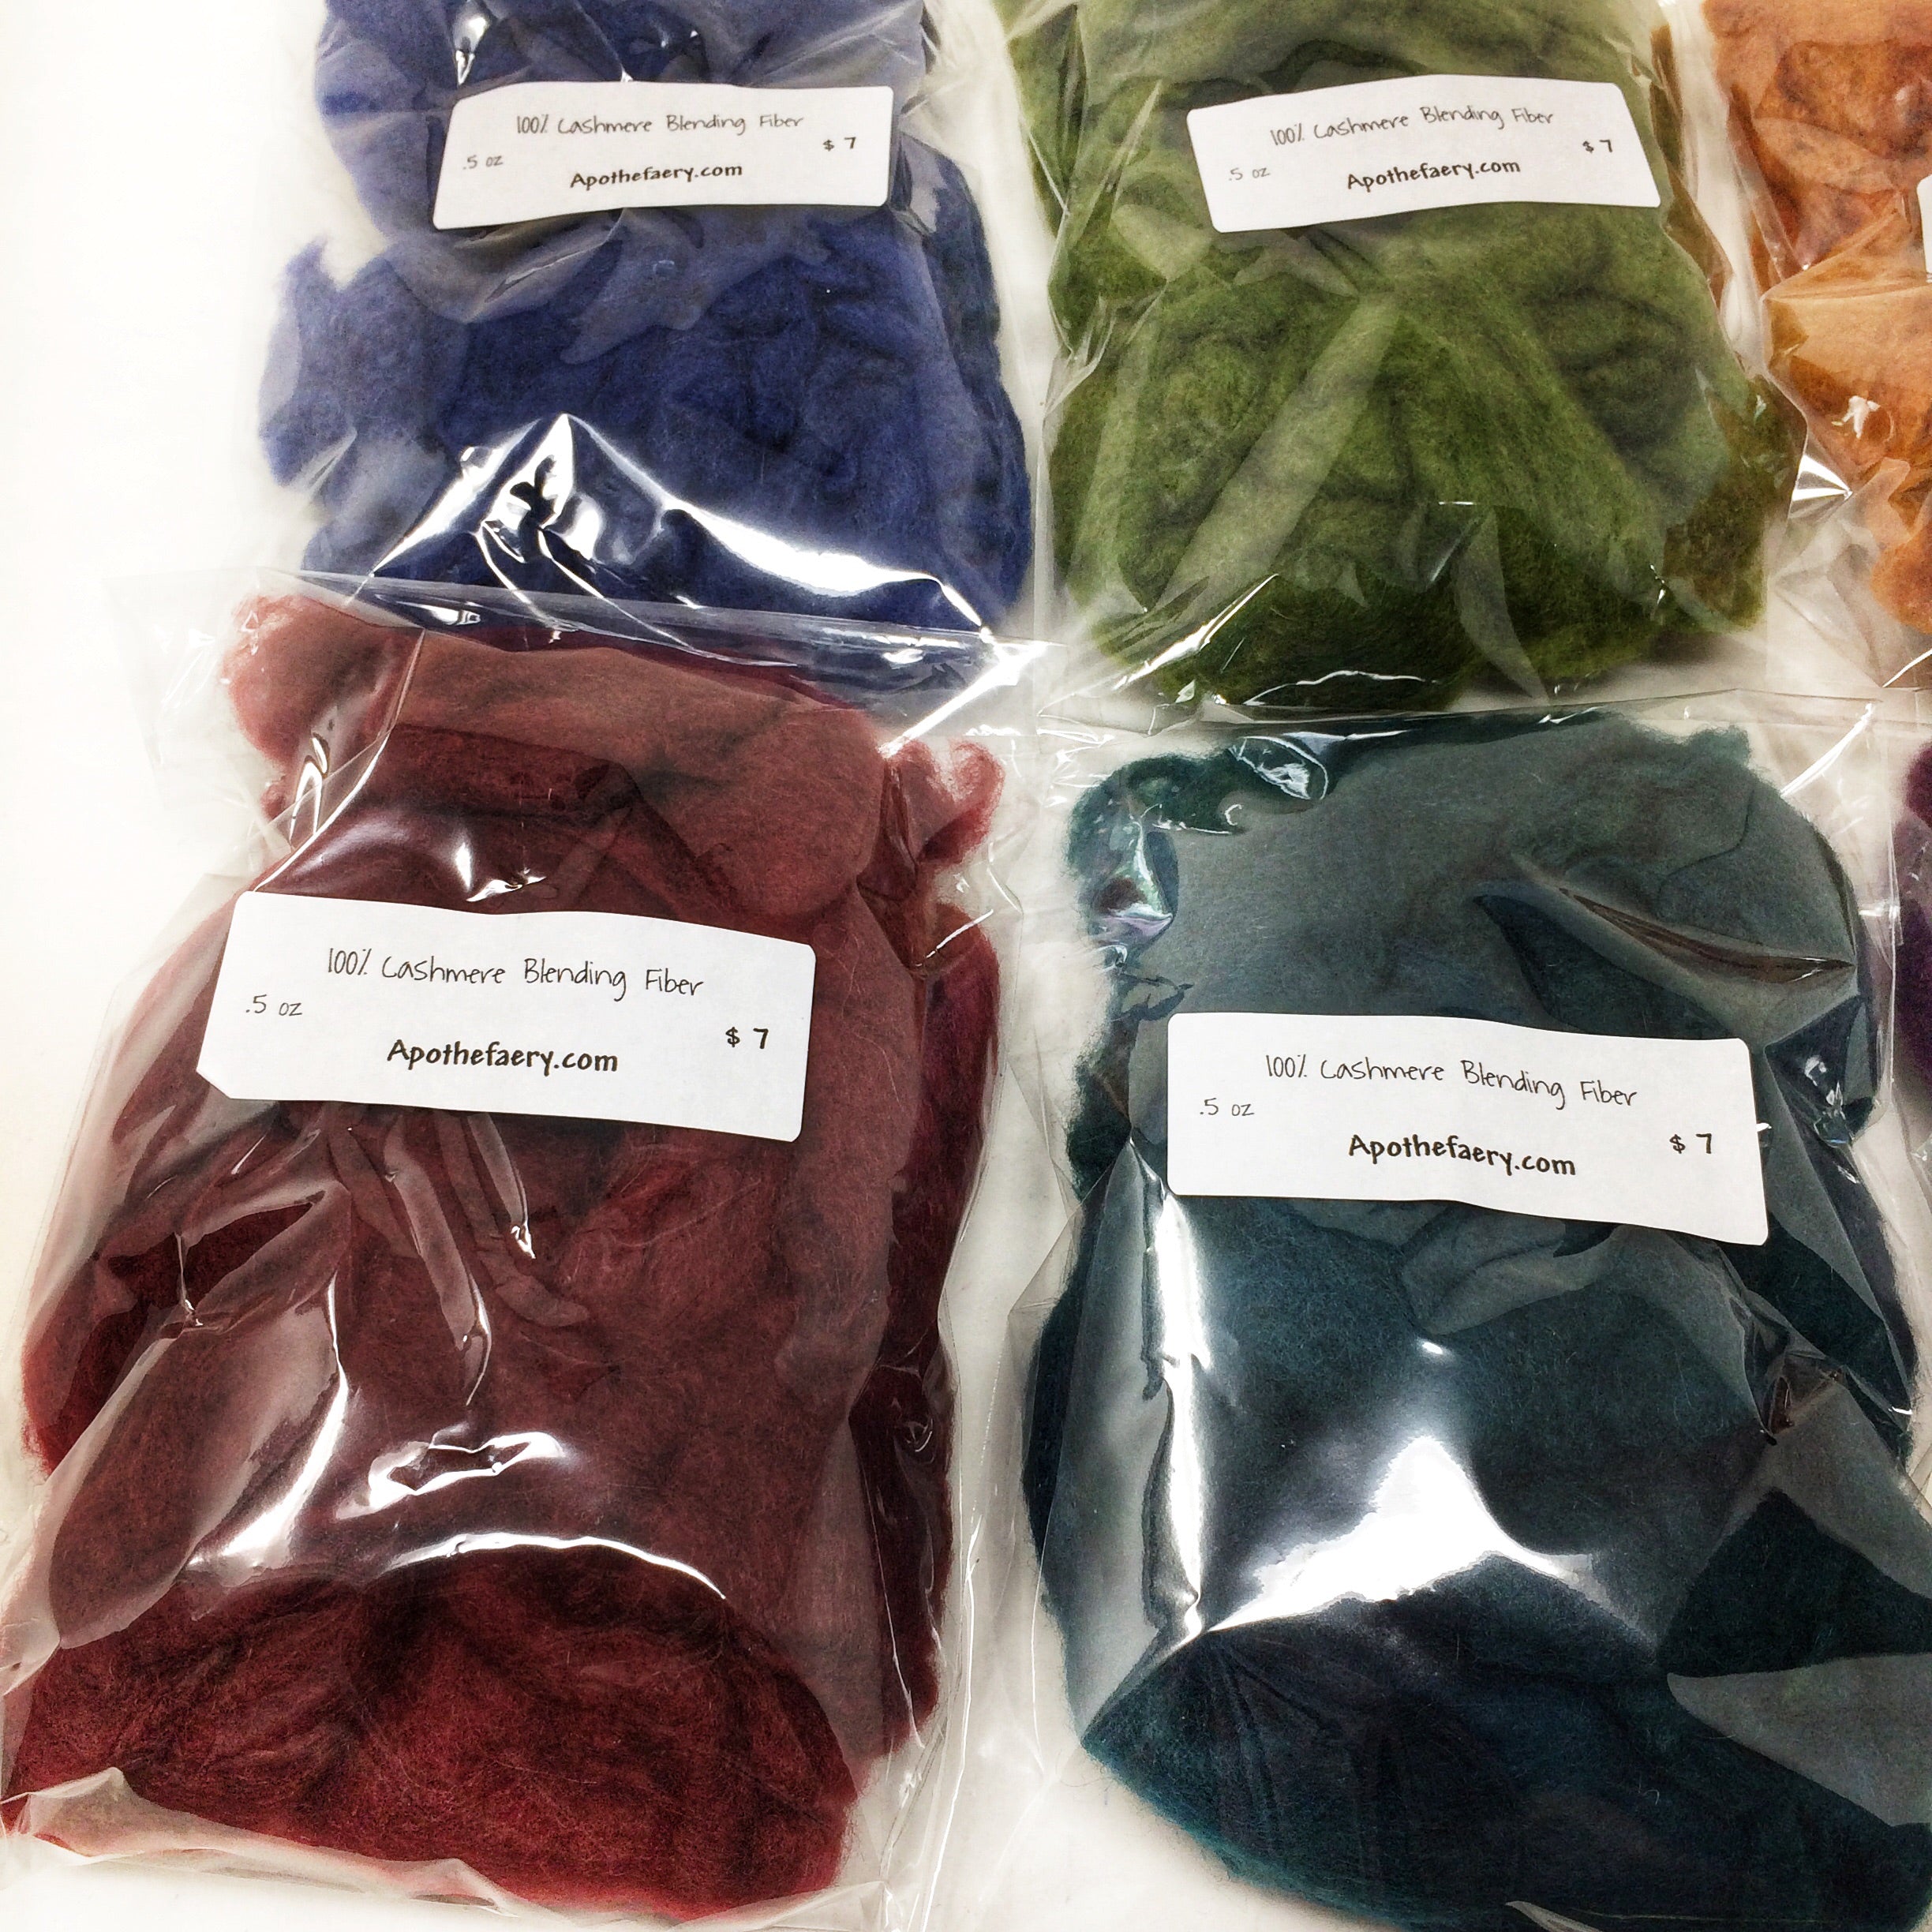 Jewel Tone Blending Cashmere - sold by the oz